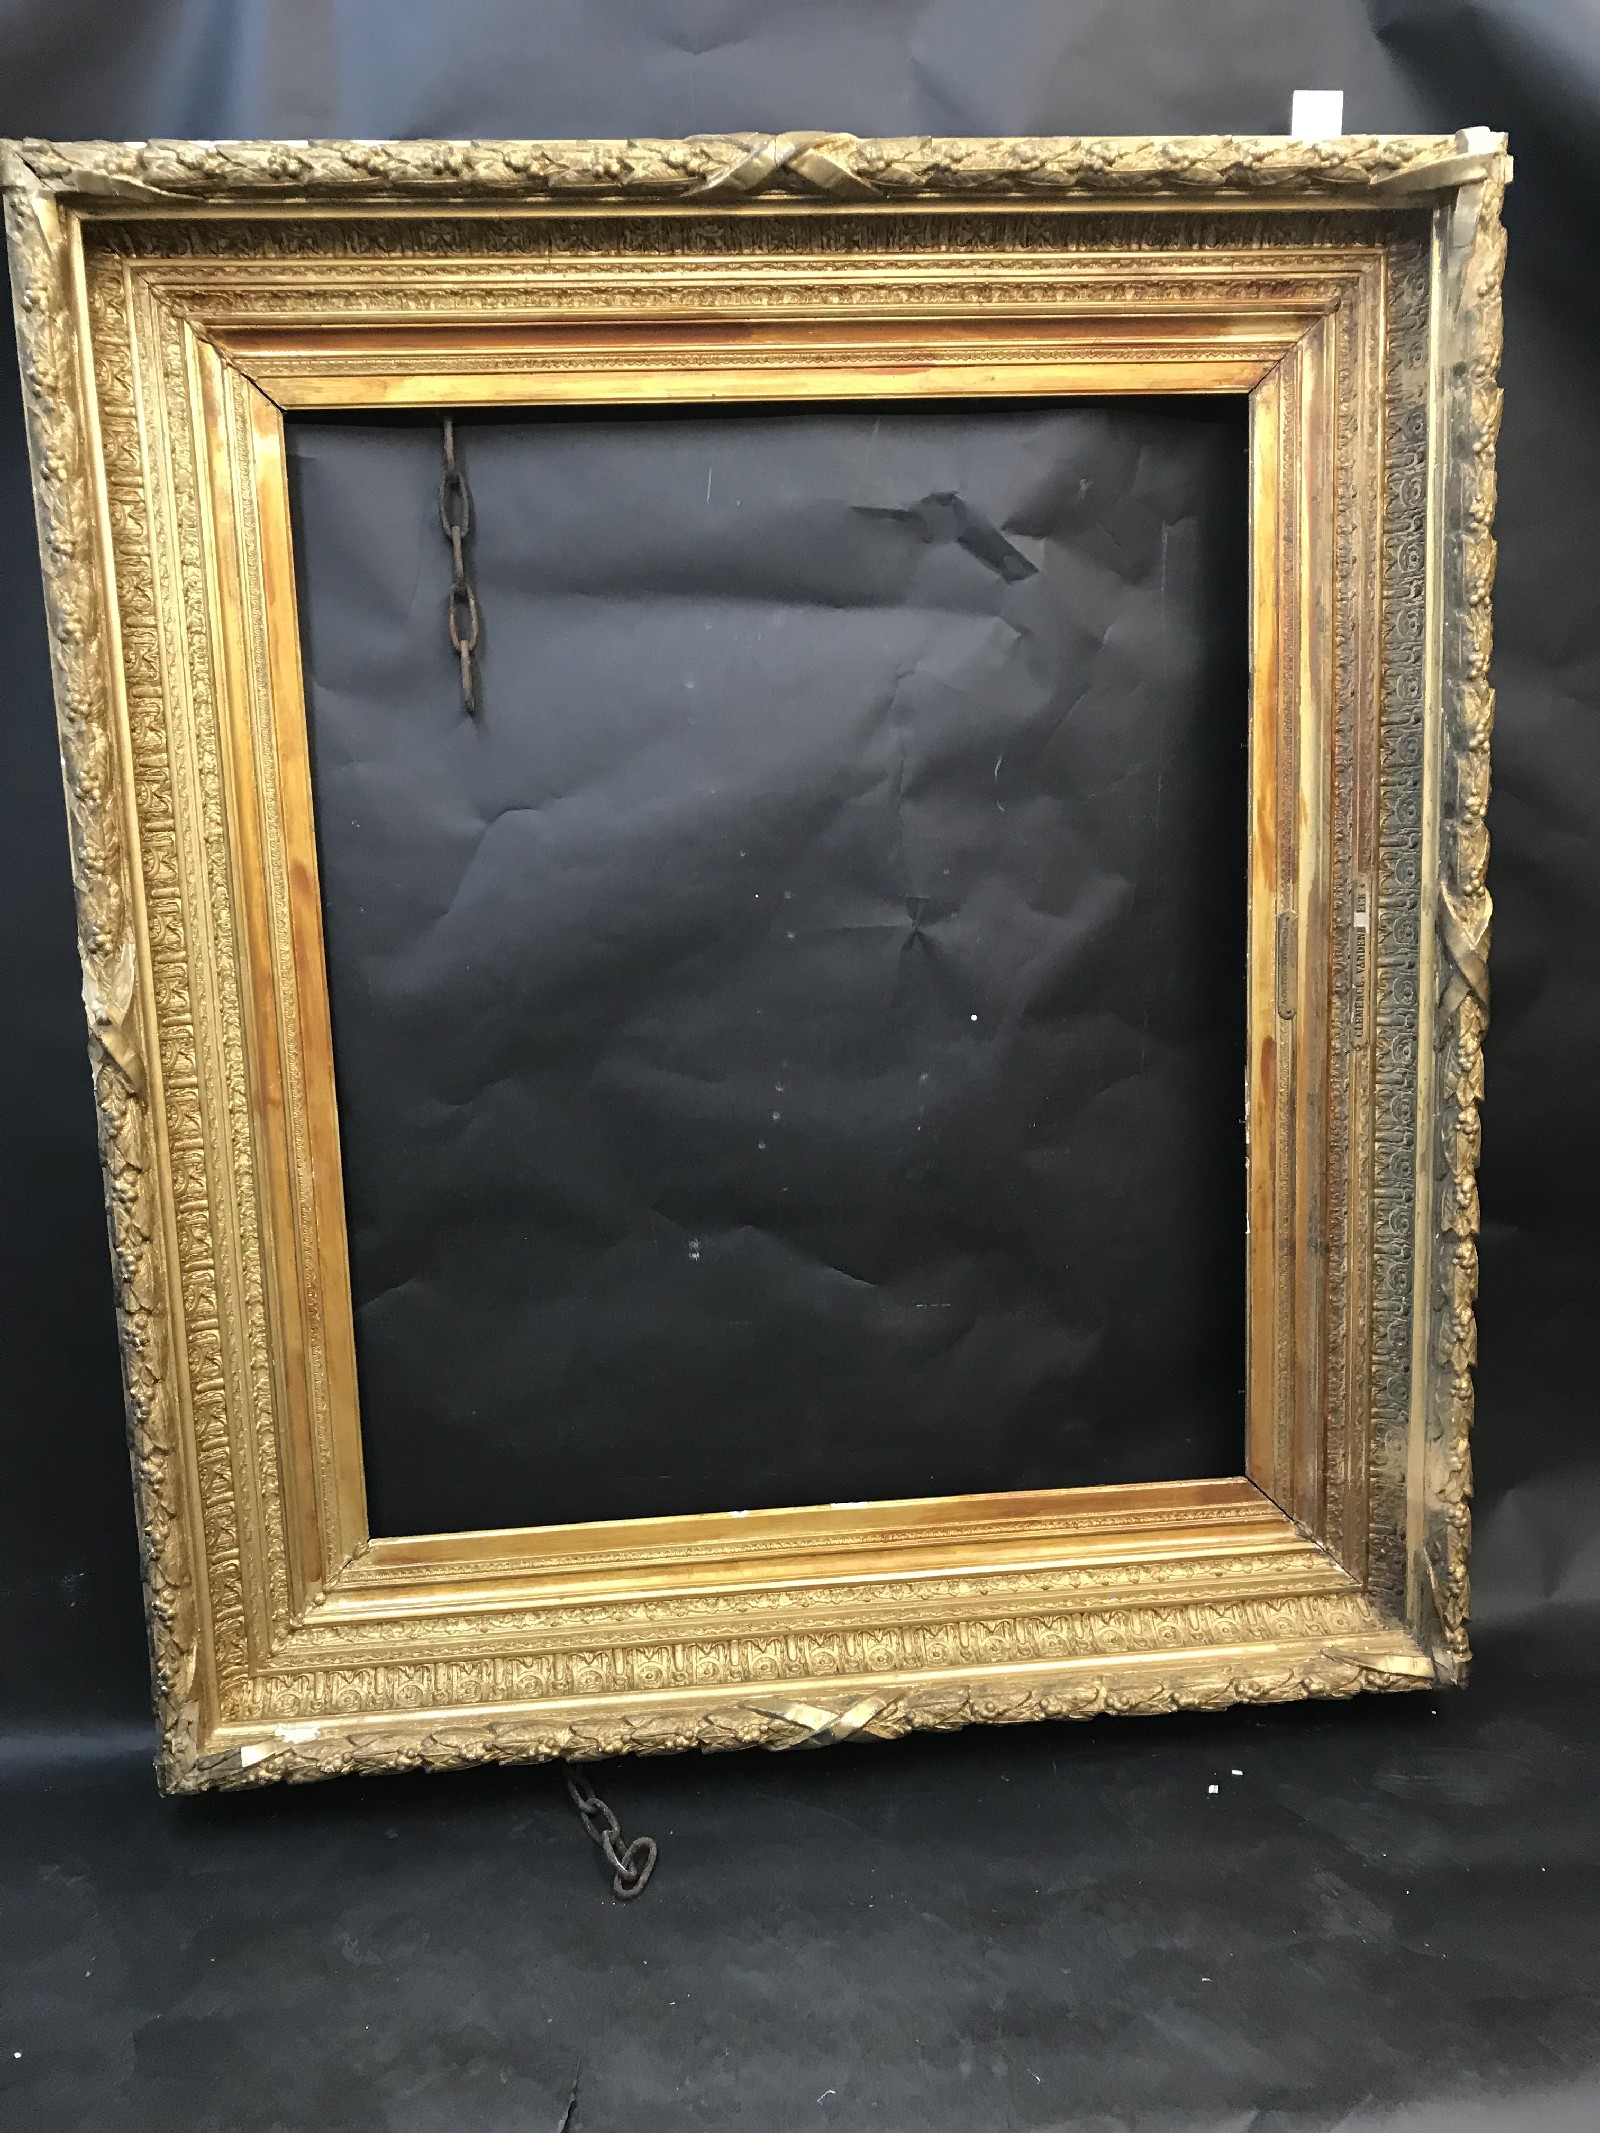 19th Century English School. A Gilt Composition Frame, 43.5" x 36" (rebate). - Image 2 of 3